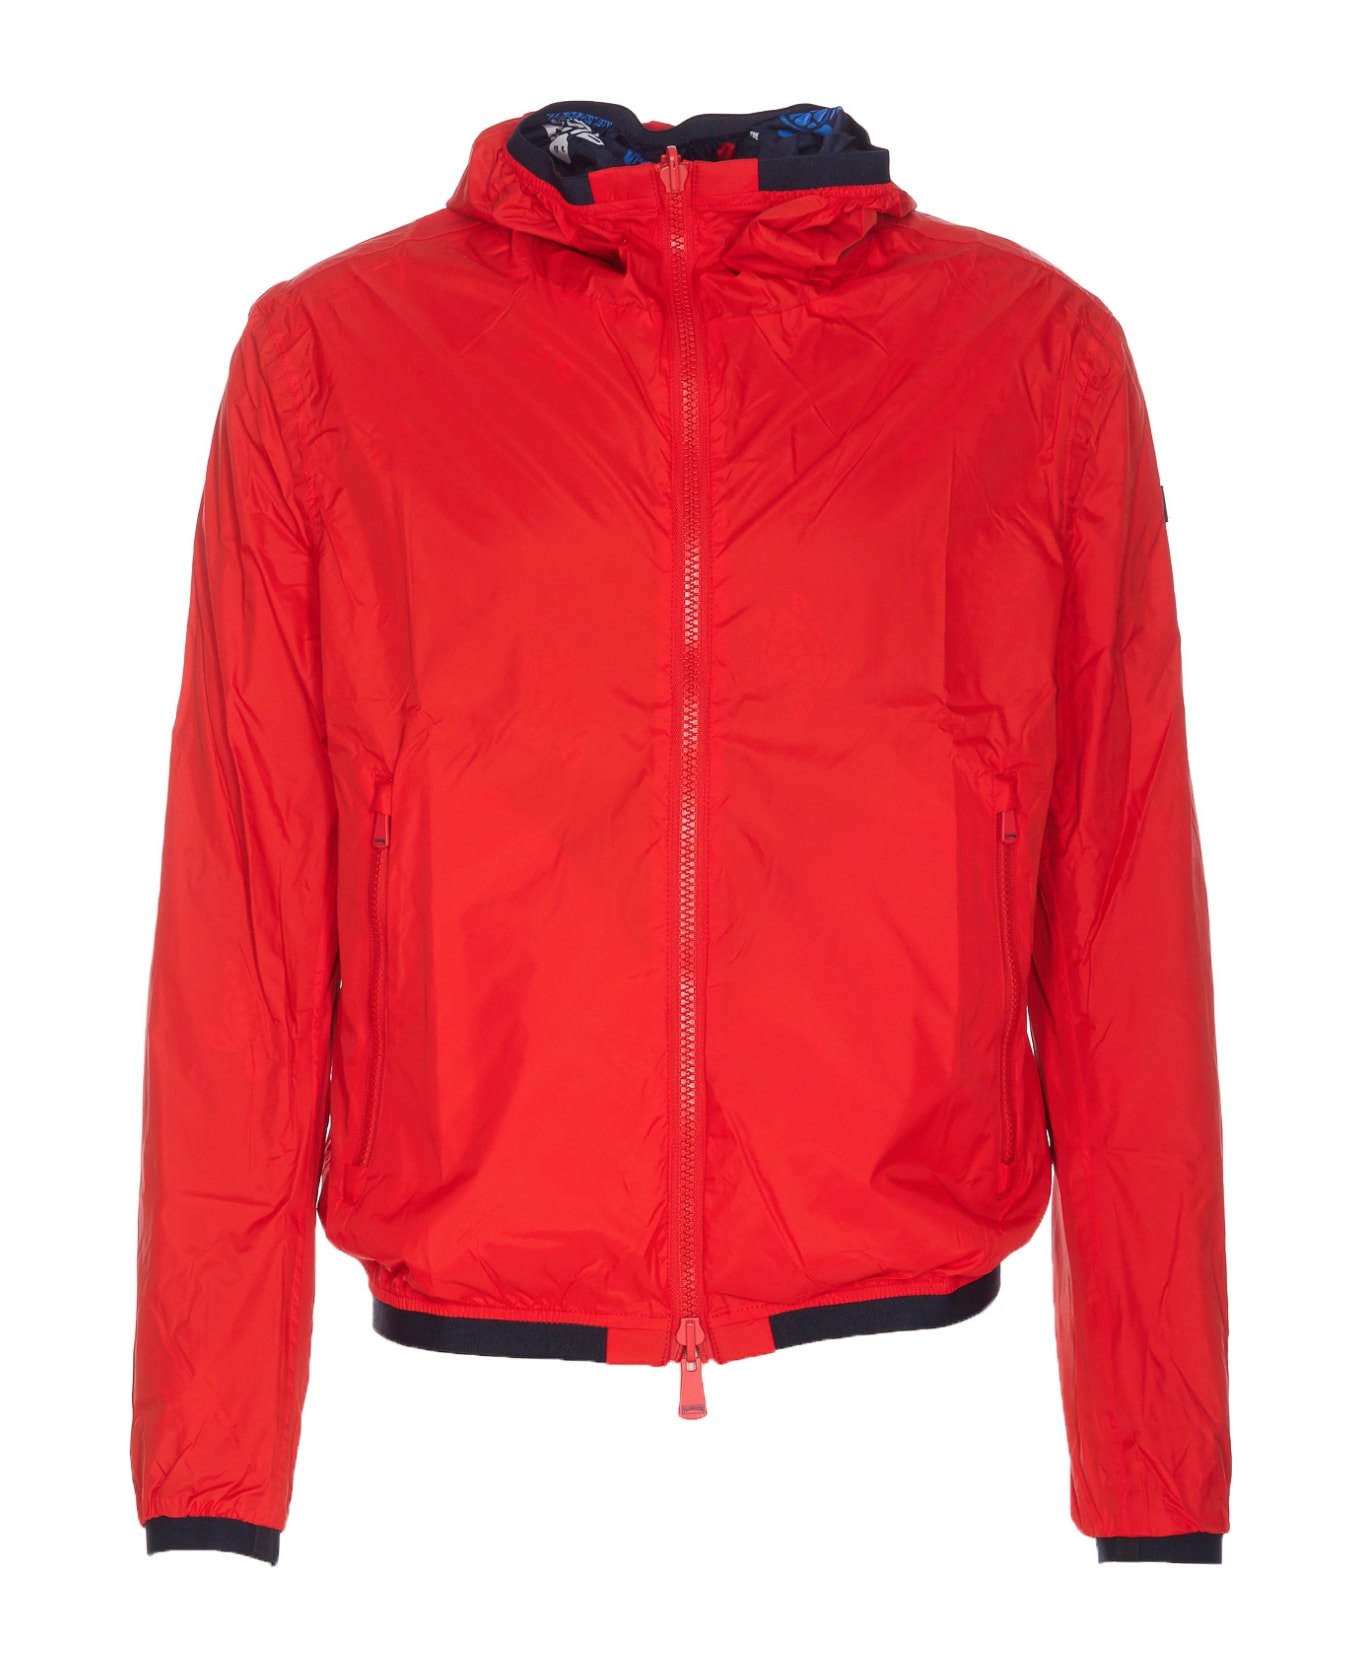 Vilebrequin Micro Rondes Des Tortues Reversible Jacket - Red